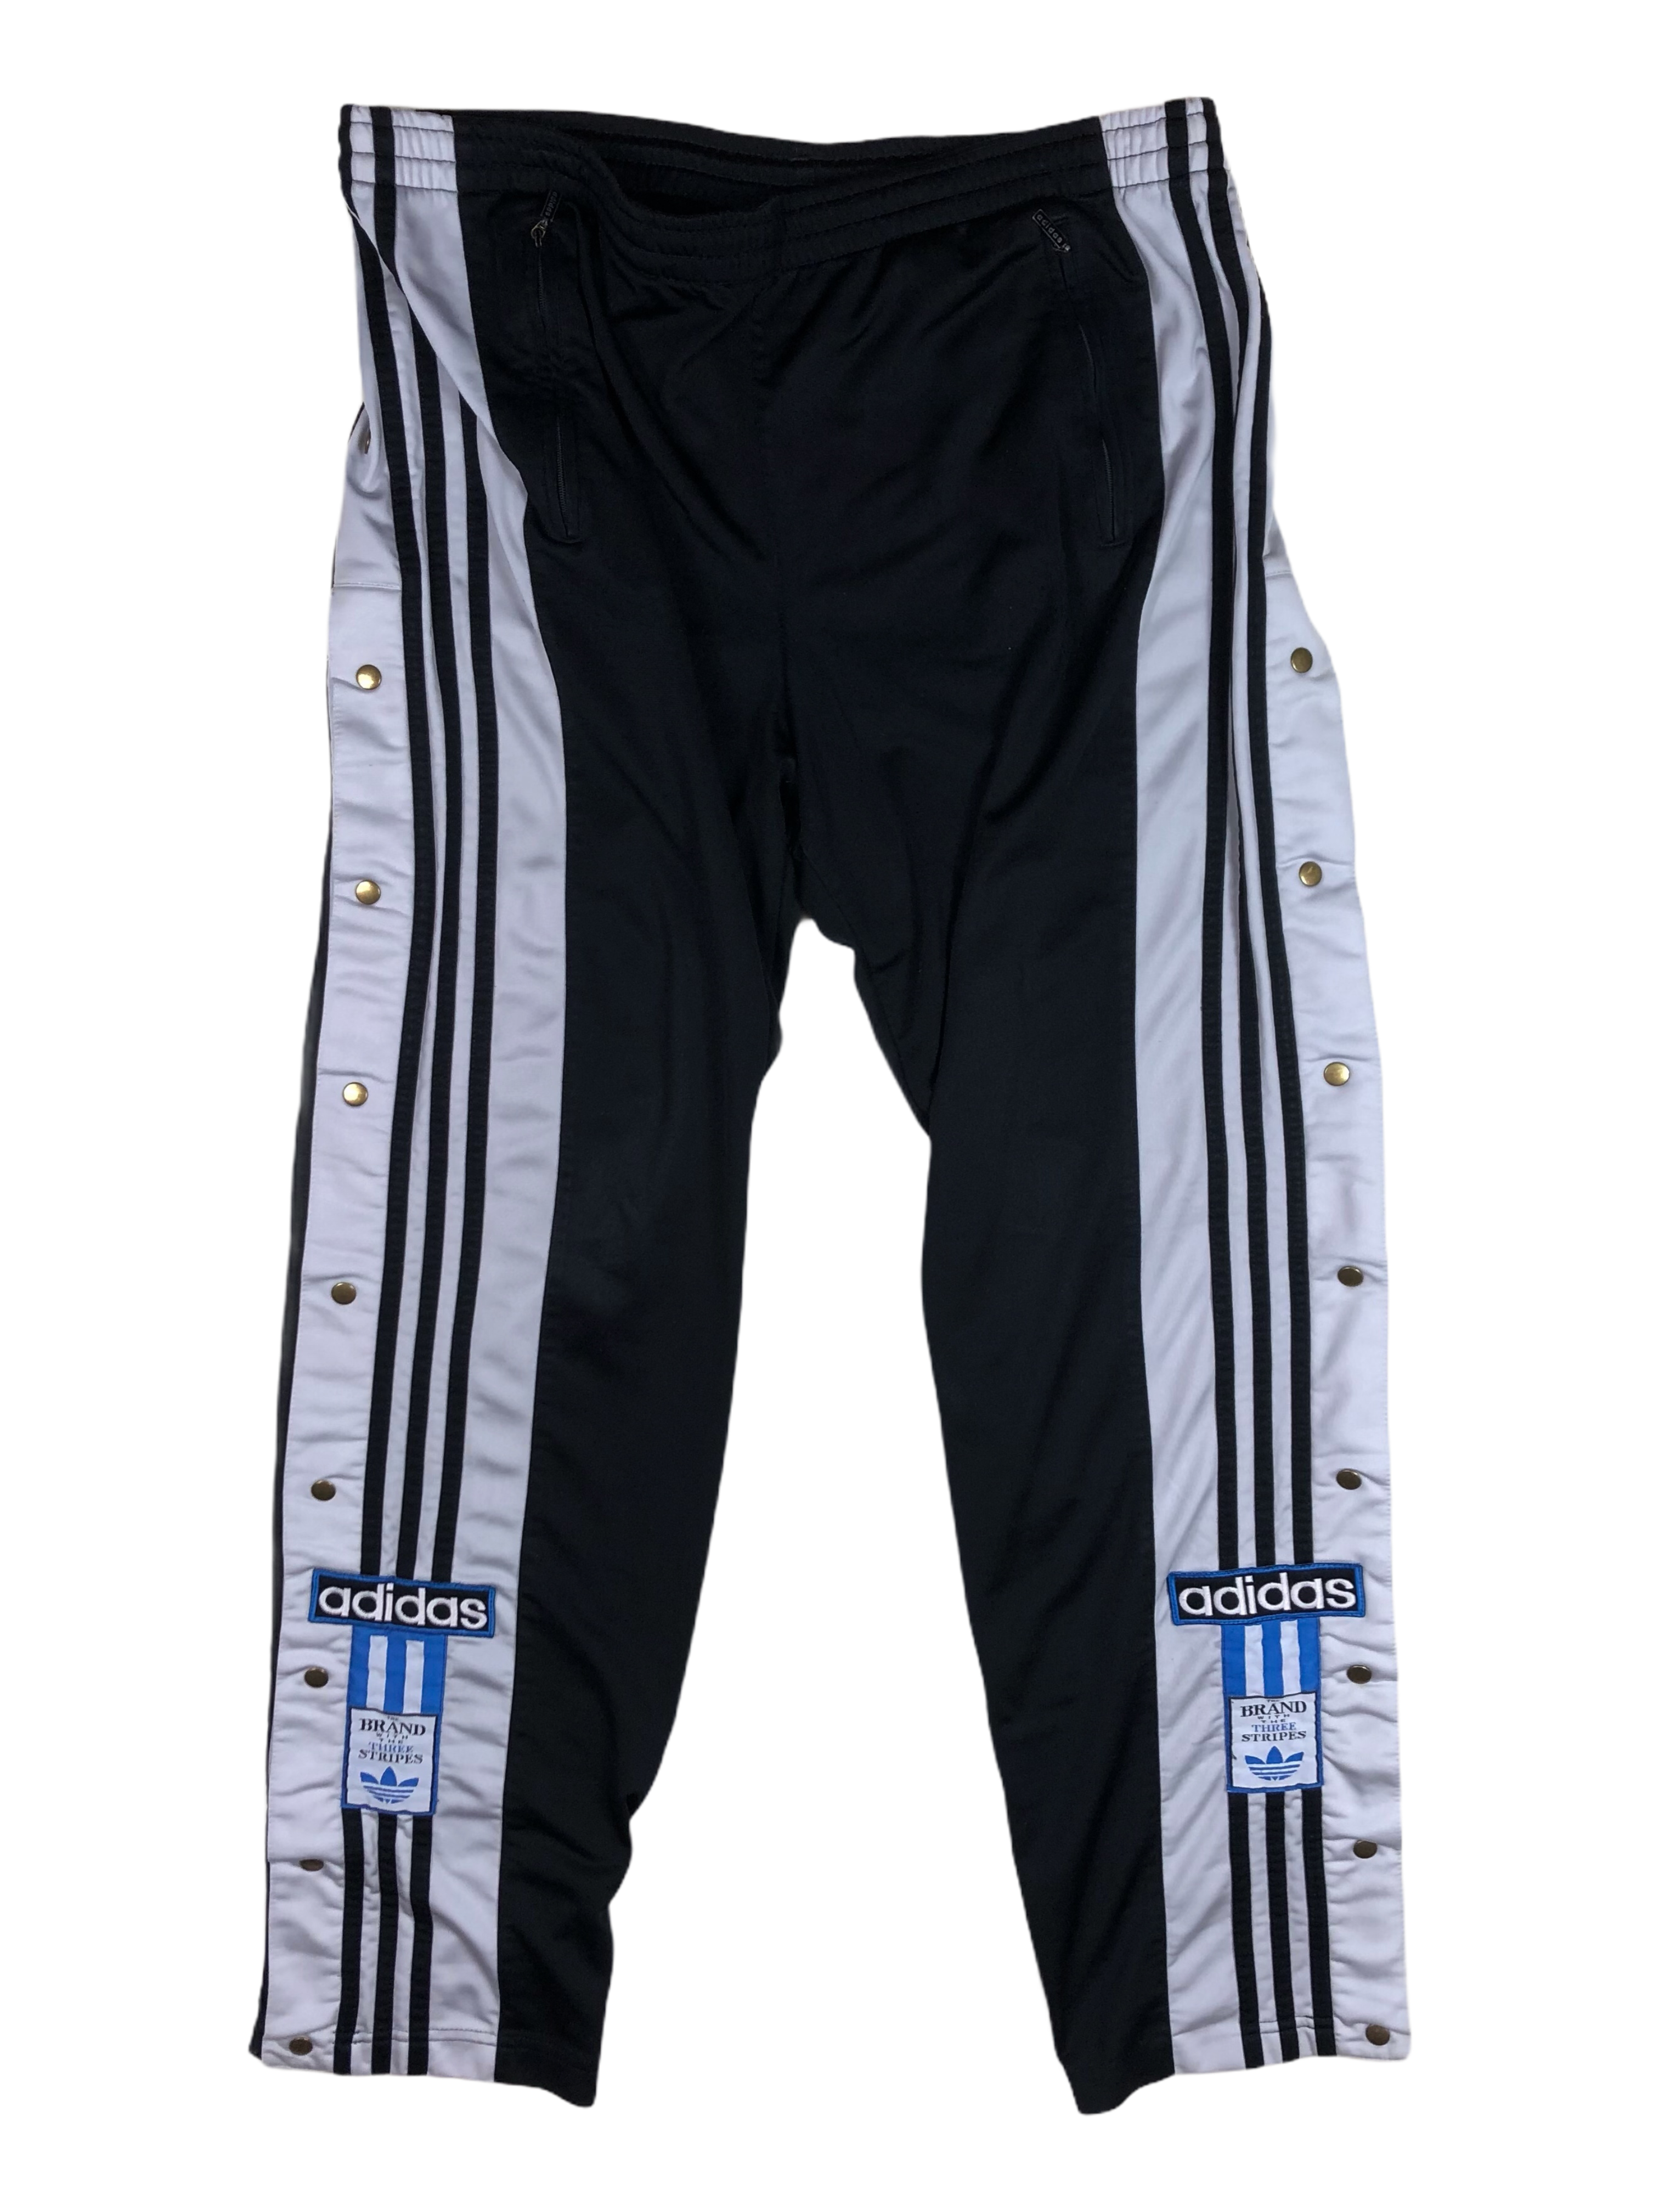 RvceShops  adidas popper pants pink black friday deals White Grey  adidas  popper pants pink black friday deals  FY7201